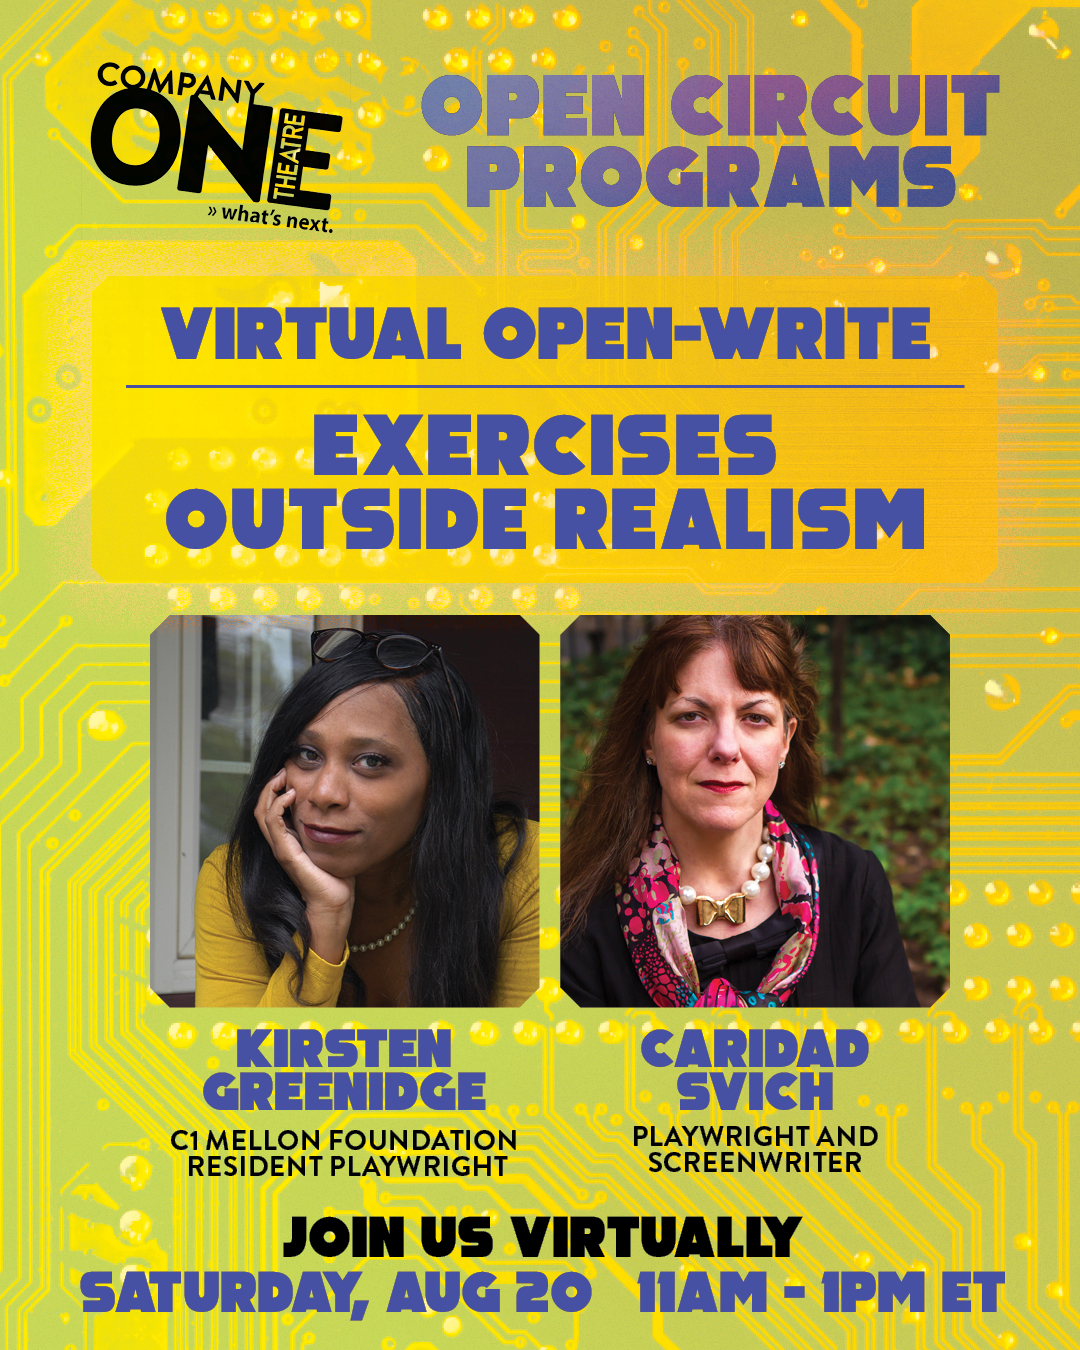 Company One Open Circuit Programs Virtual Open-Write: Exercises Outside Realism Kirsten Greenidge, C1 Mellon Foundation Resident Playwright Caridad Svich, playwright and screenwriter  Join us virtually Saturday Aug 20 from 11am - 1pm ET